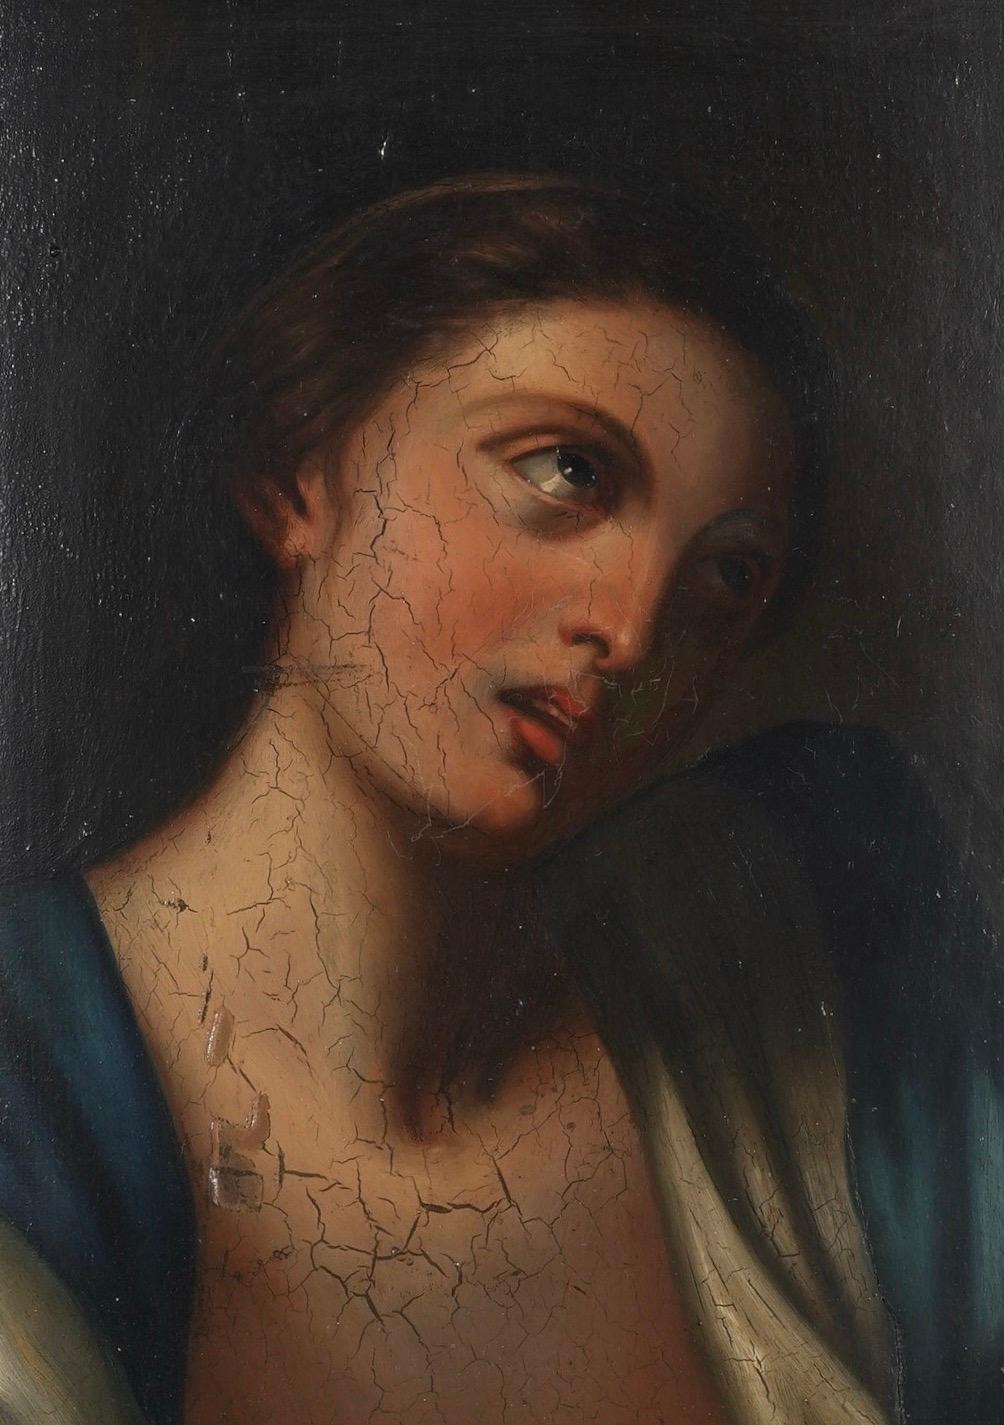 French oil on panel painting of a woman. Composed on a wooden panel, this c. 1815 oil depicts a woman displaying the exaggerated, theatrical mannerisms of the Neoclassical style that was in vogue at the time (see David’s “Oath of the Horati,” the